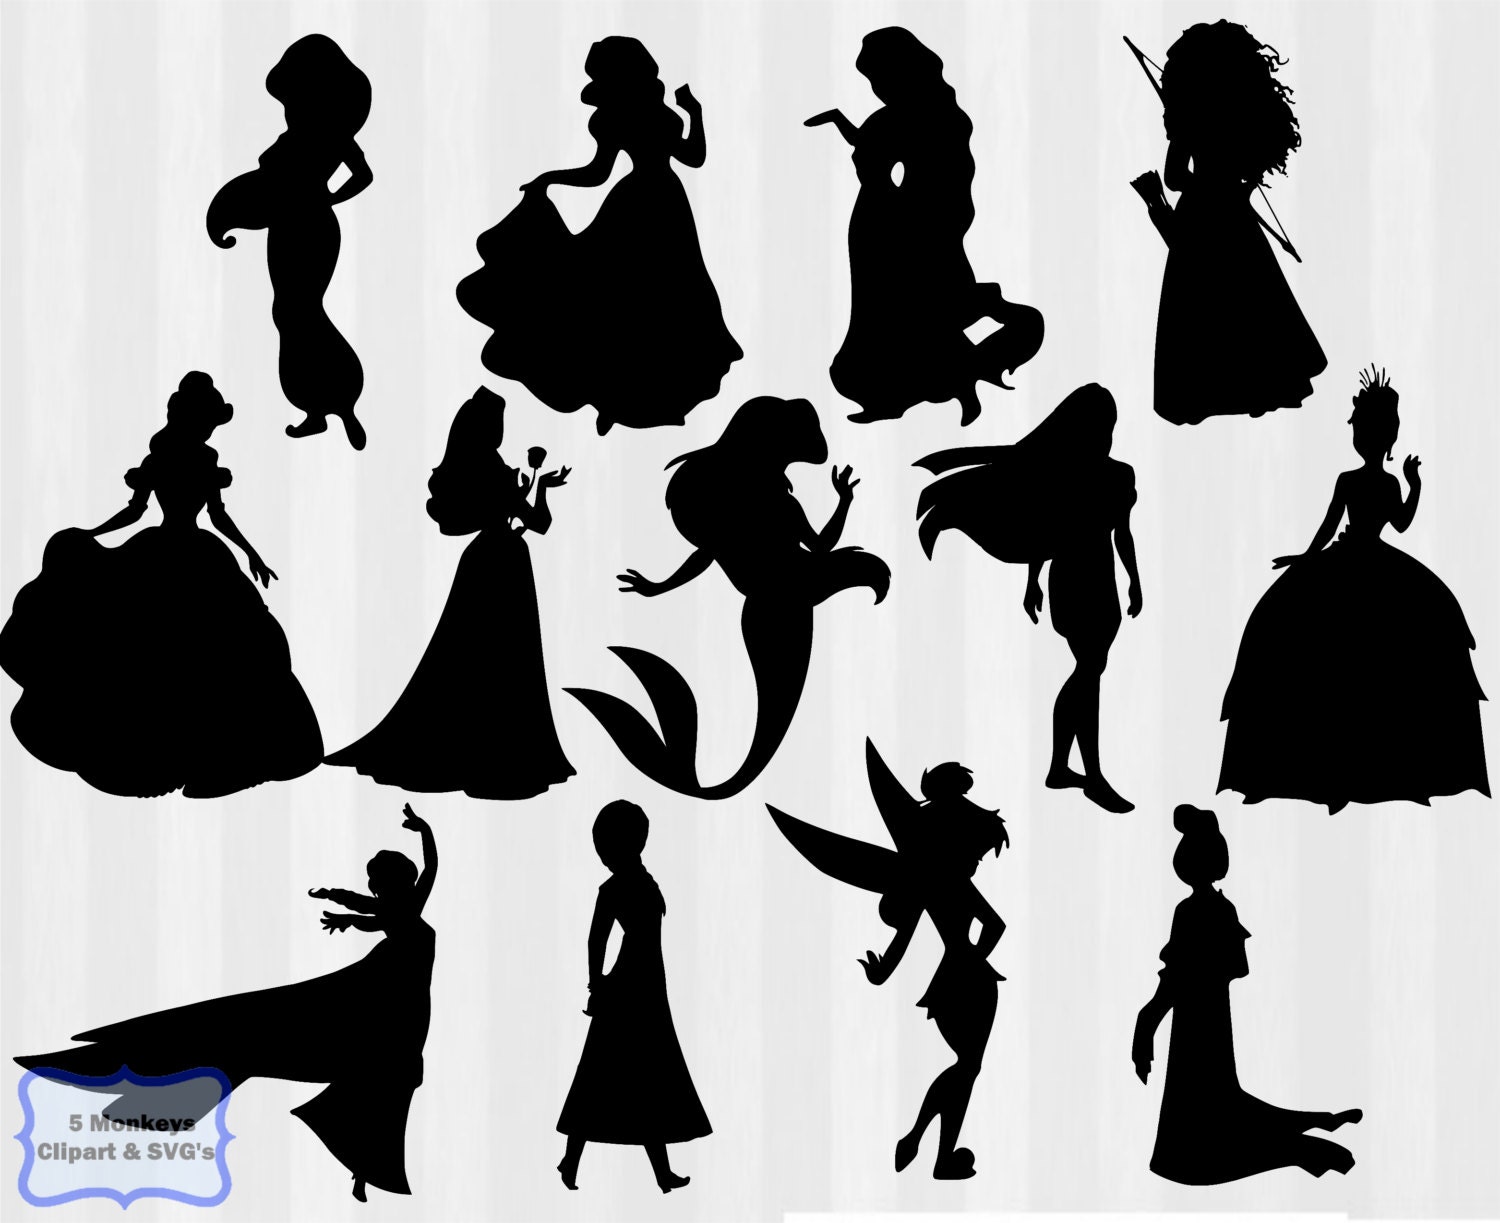 Disney Princess Silhouettes svg file by SuperSVGandClipart on Etsy